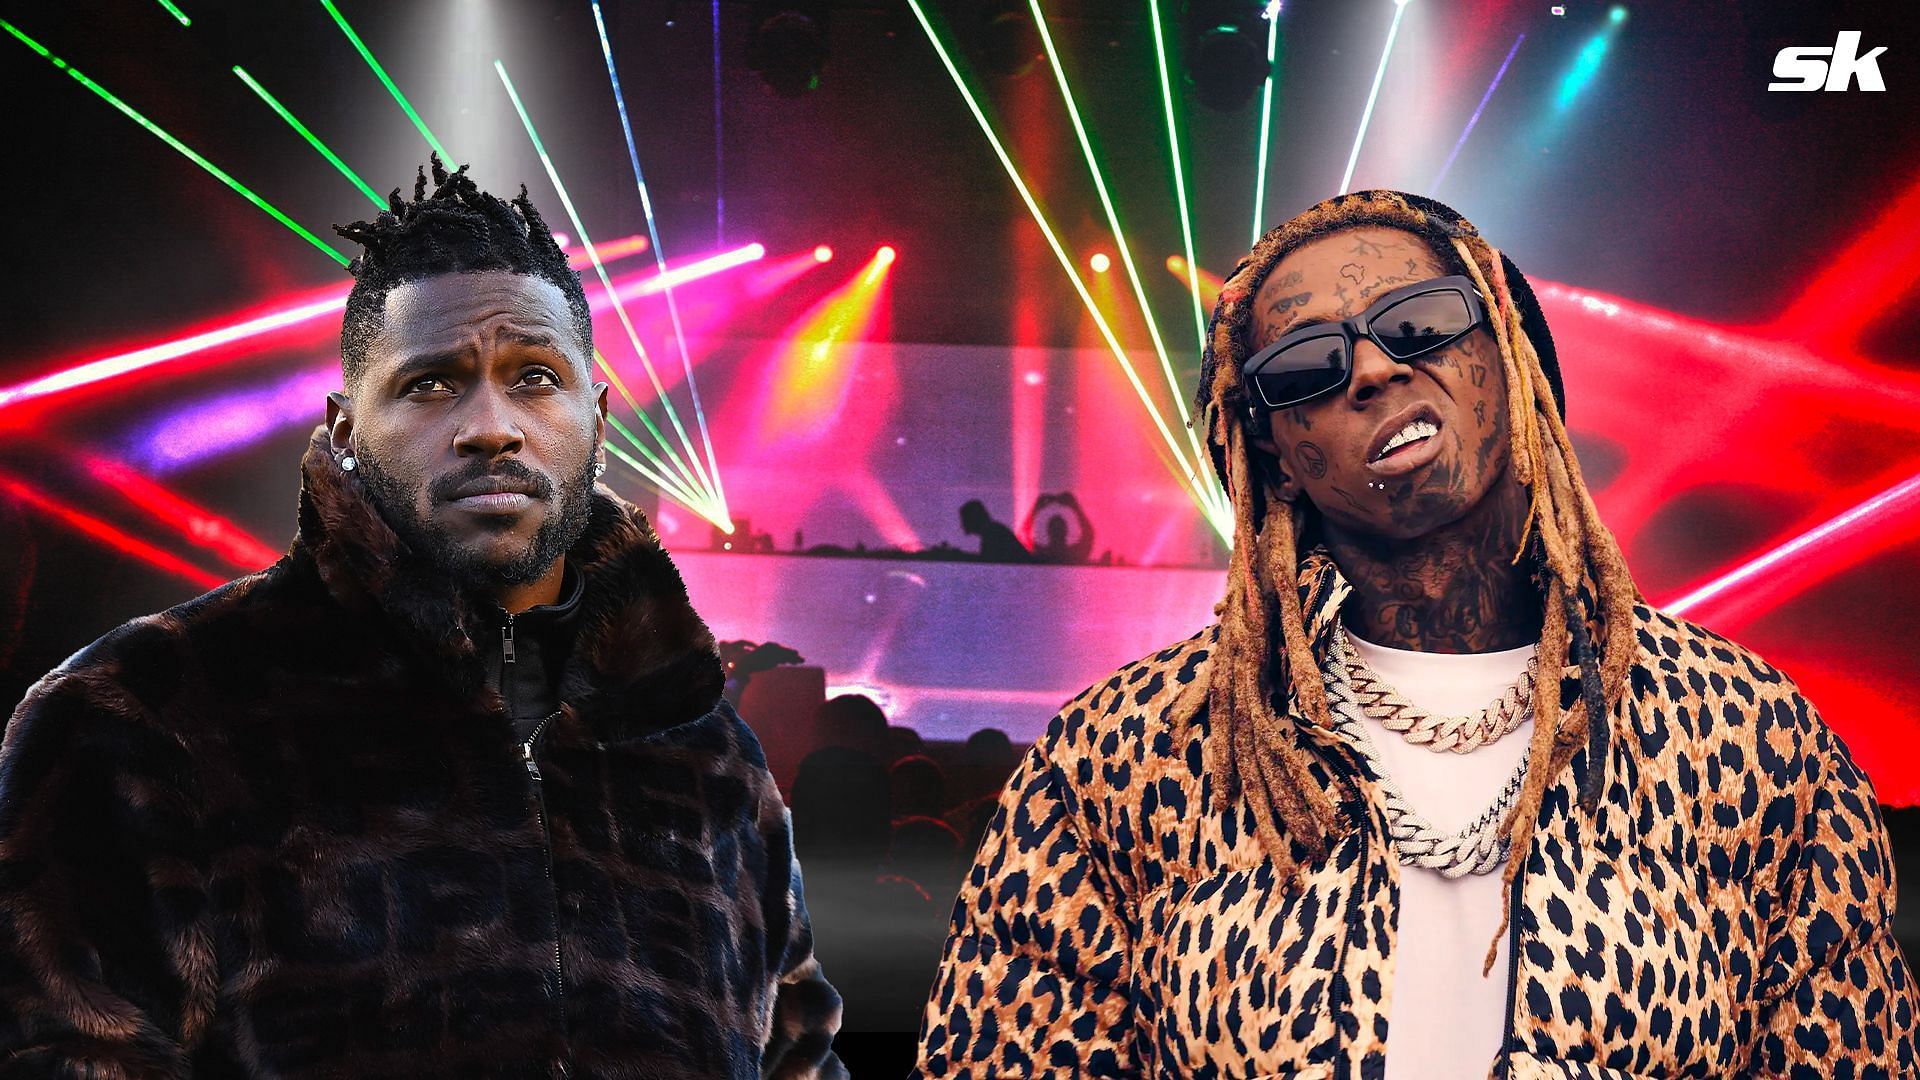 Antonio Brown and Lil Wayne on a song?